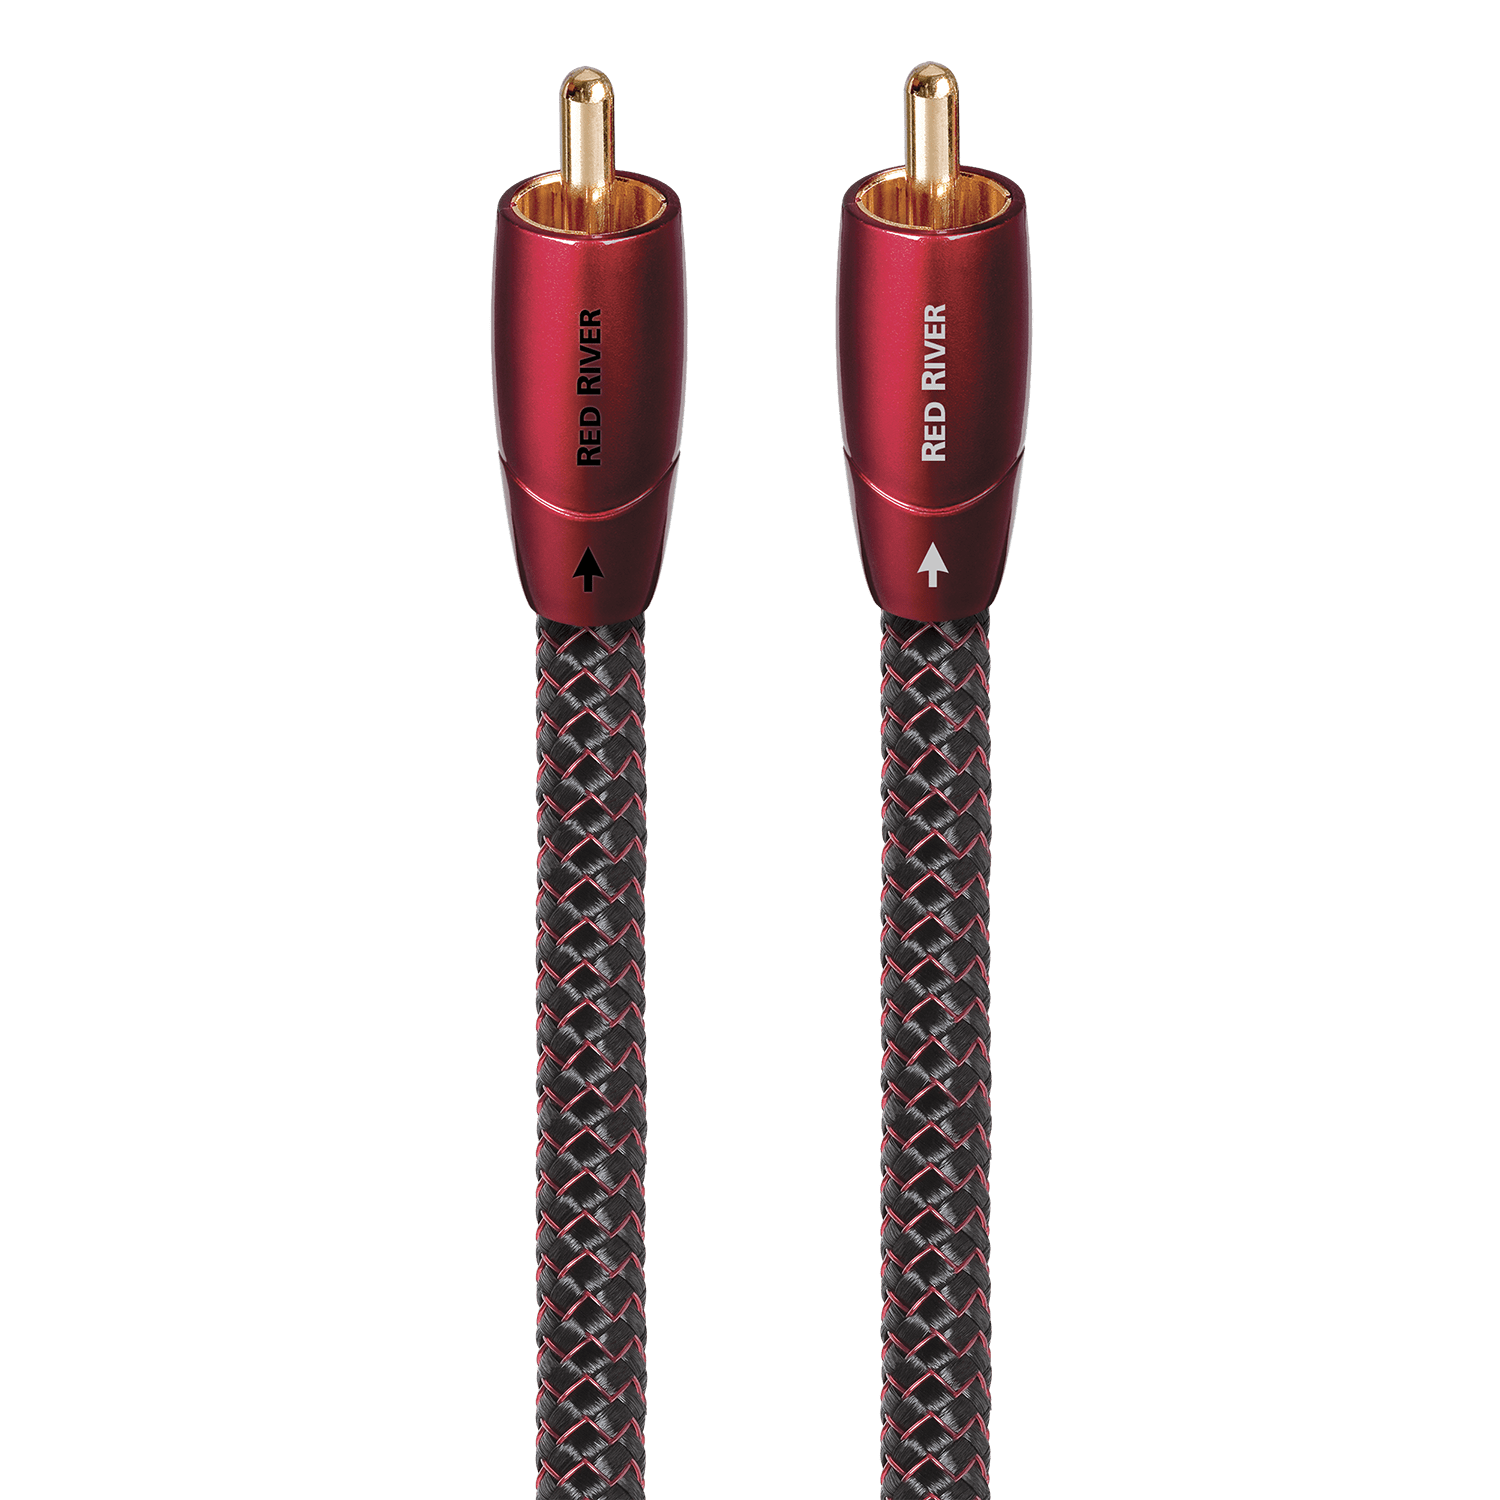 AudioQuest Chicago RCA > RCA Analog Audio Interconnect Cable - 0.5 